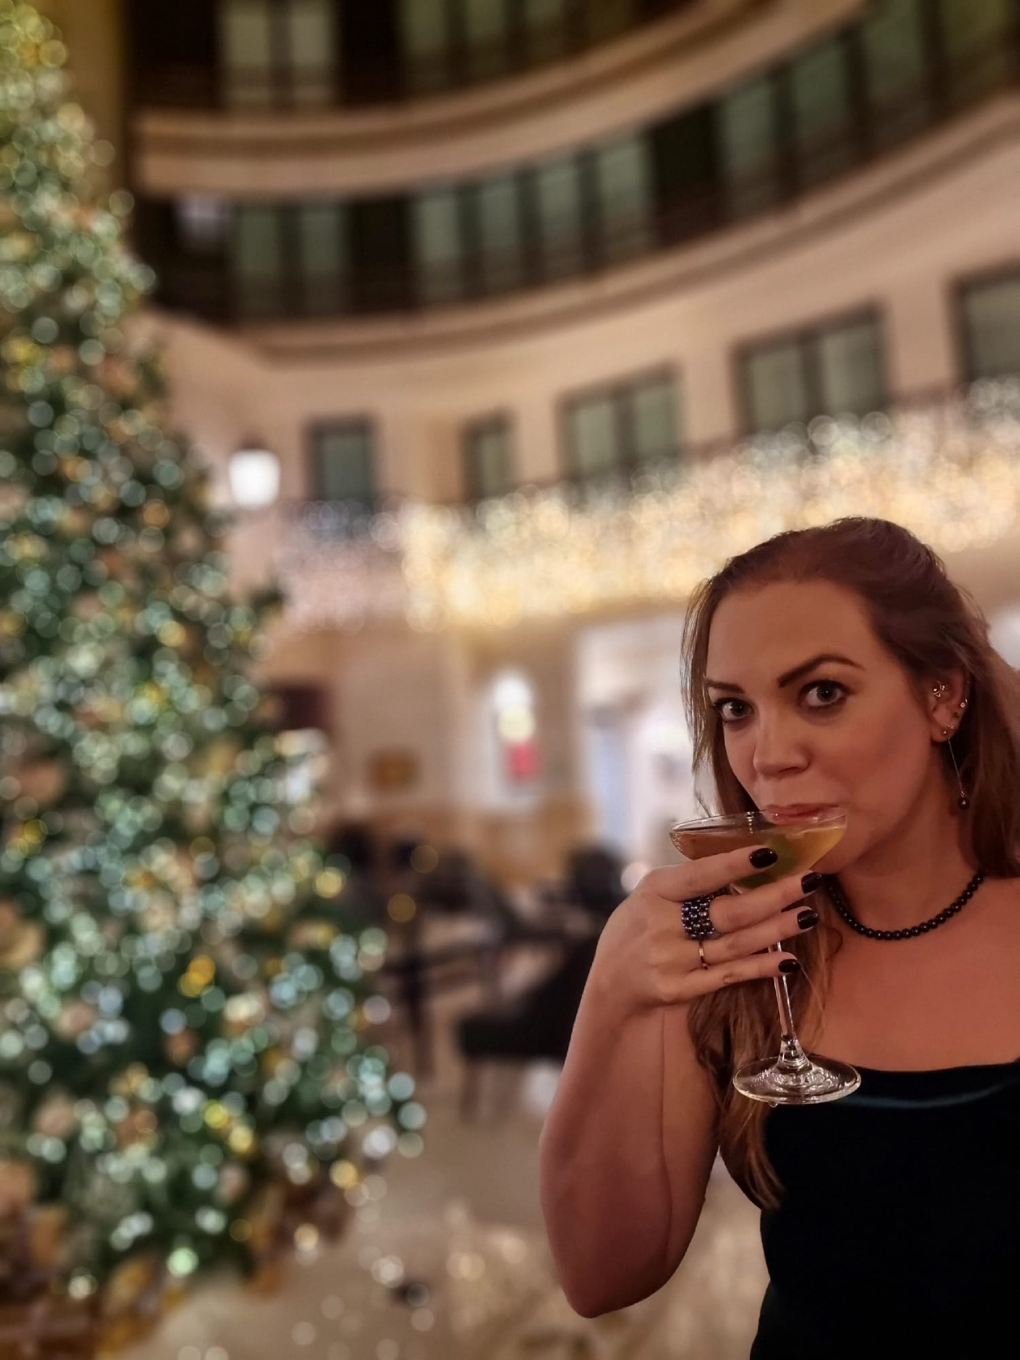 Lady drinking a martini in front of a big Christmas tree